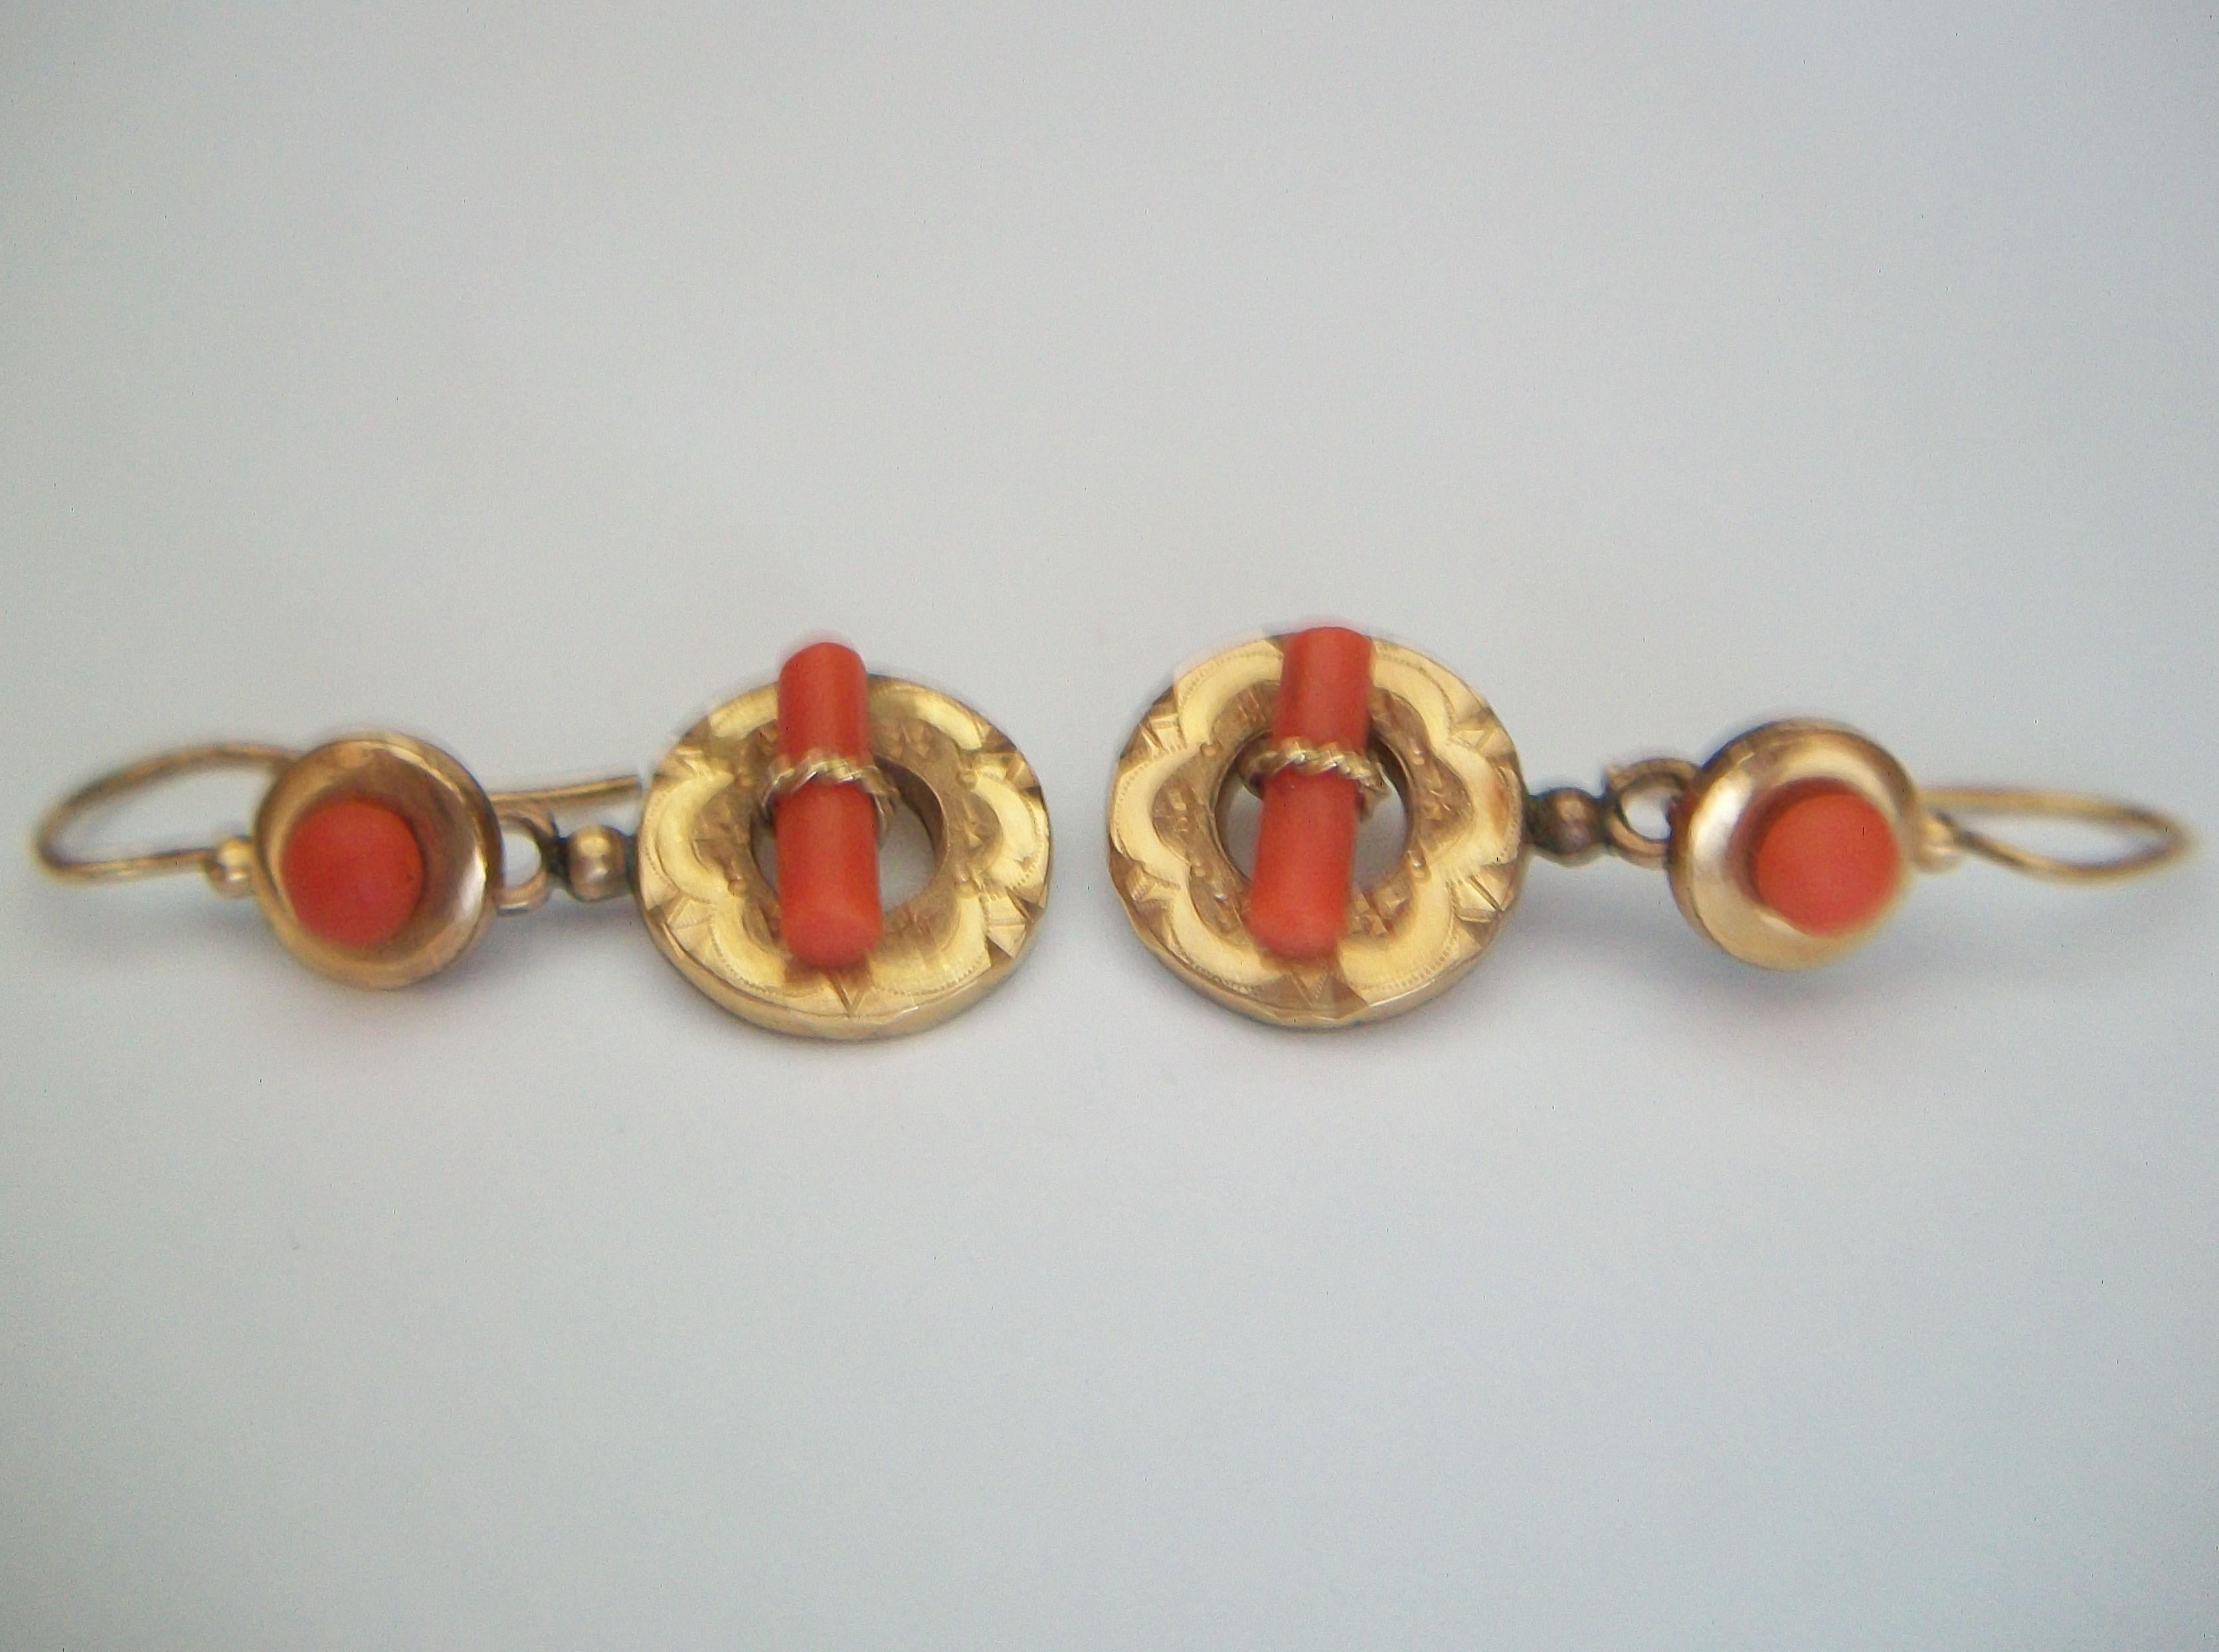 Women's Etruscan Revival Gold Filled Tooled Dangle Earrings with Coral - Circa 1880